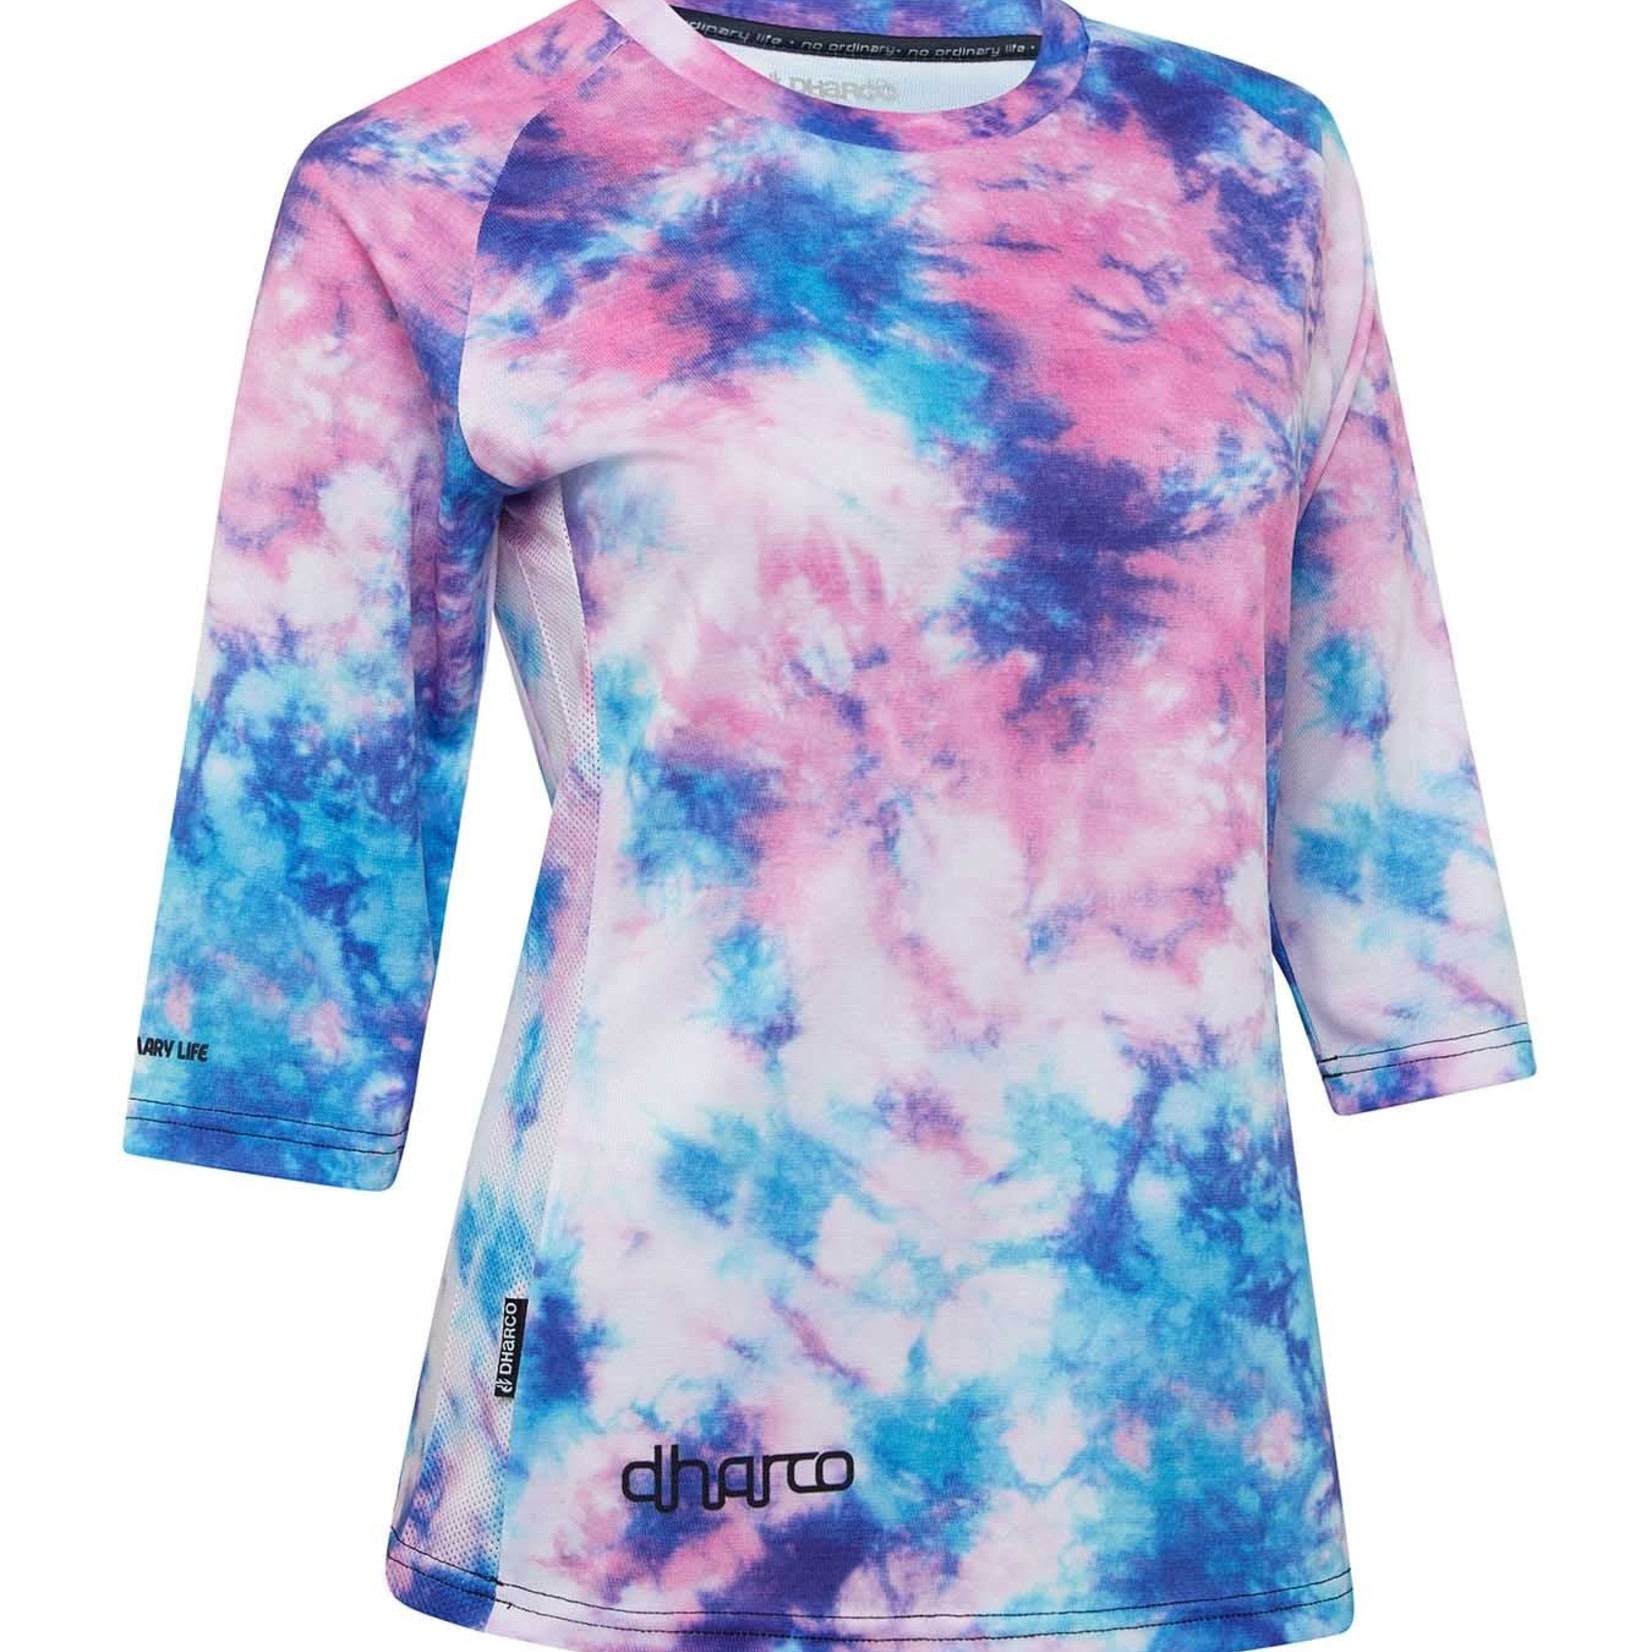 DHaRCO DHaRCO Womens 3/4 Sleeve Jersey Tie Dye L